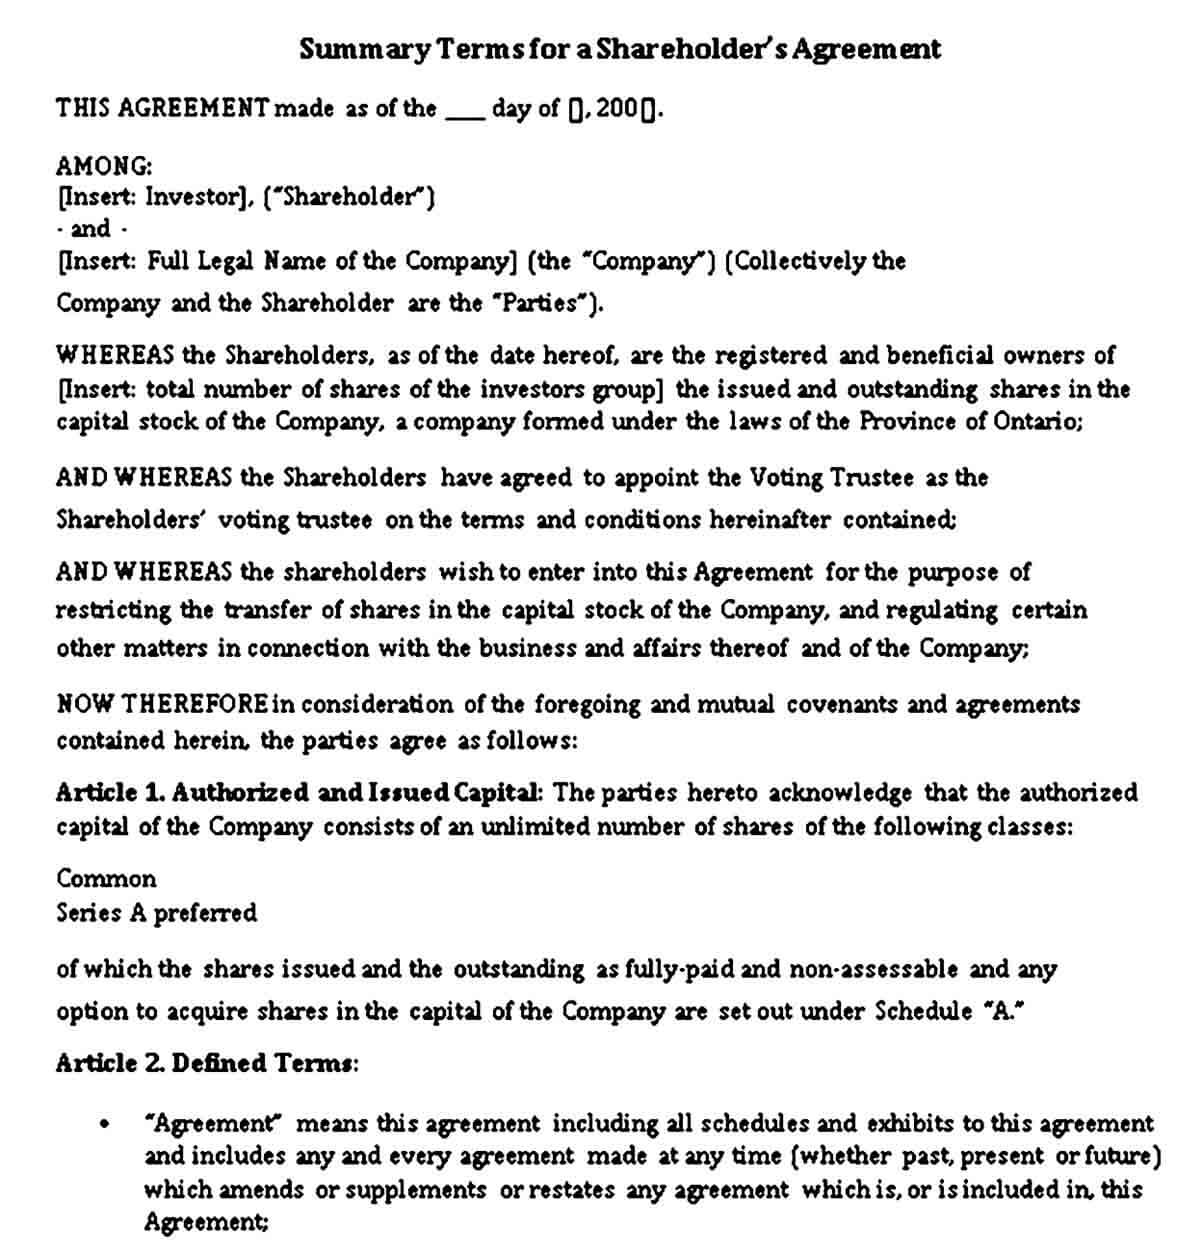 Summary Terms for Shareholders Agreement Template